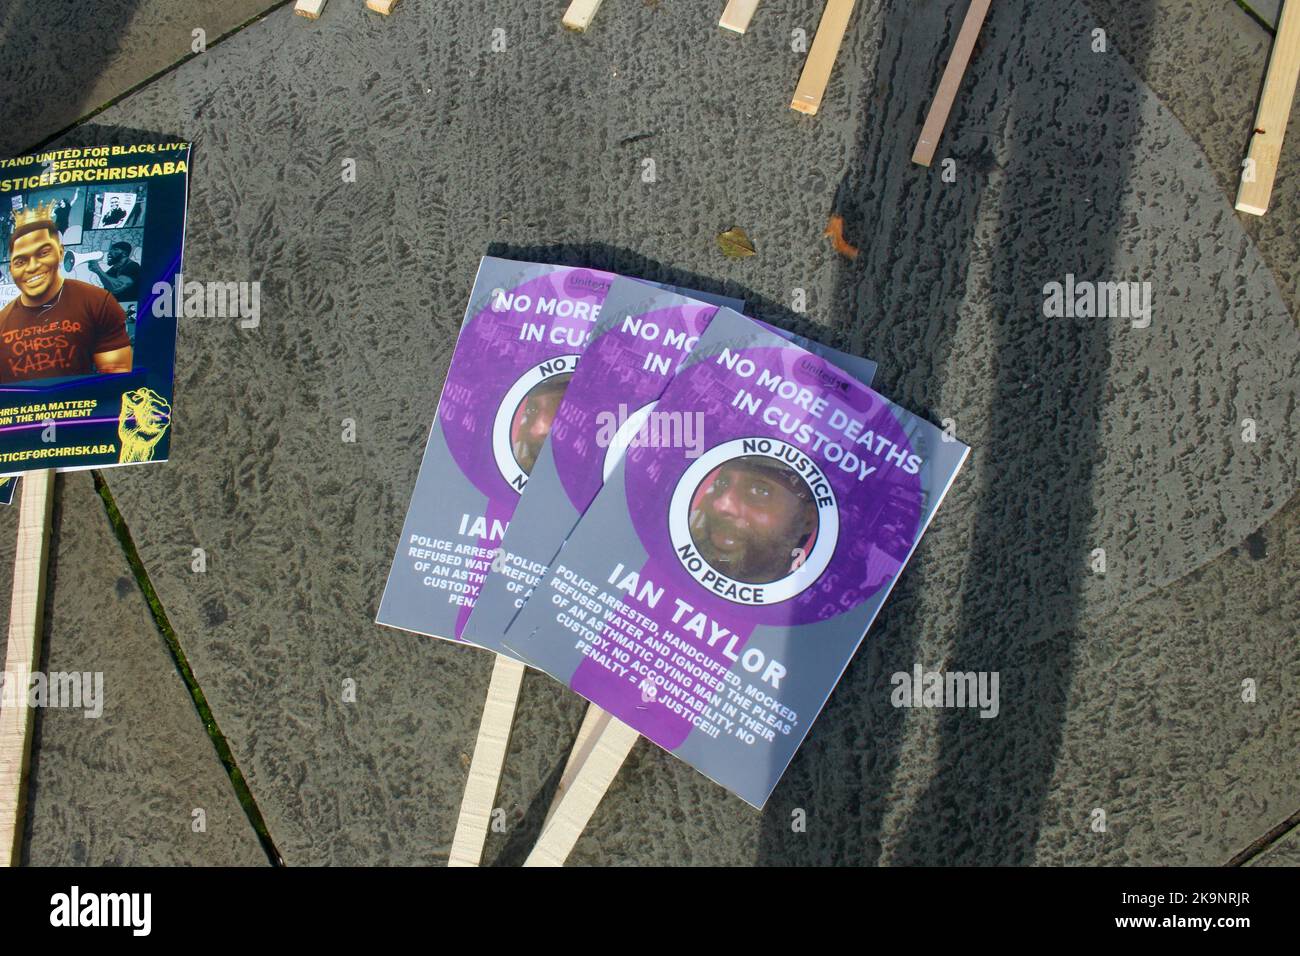 protest against deaths in police custody in britain 29th october 2022 Stock Photo